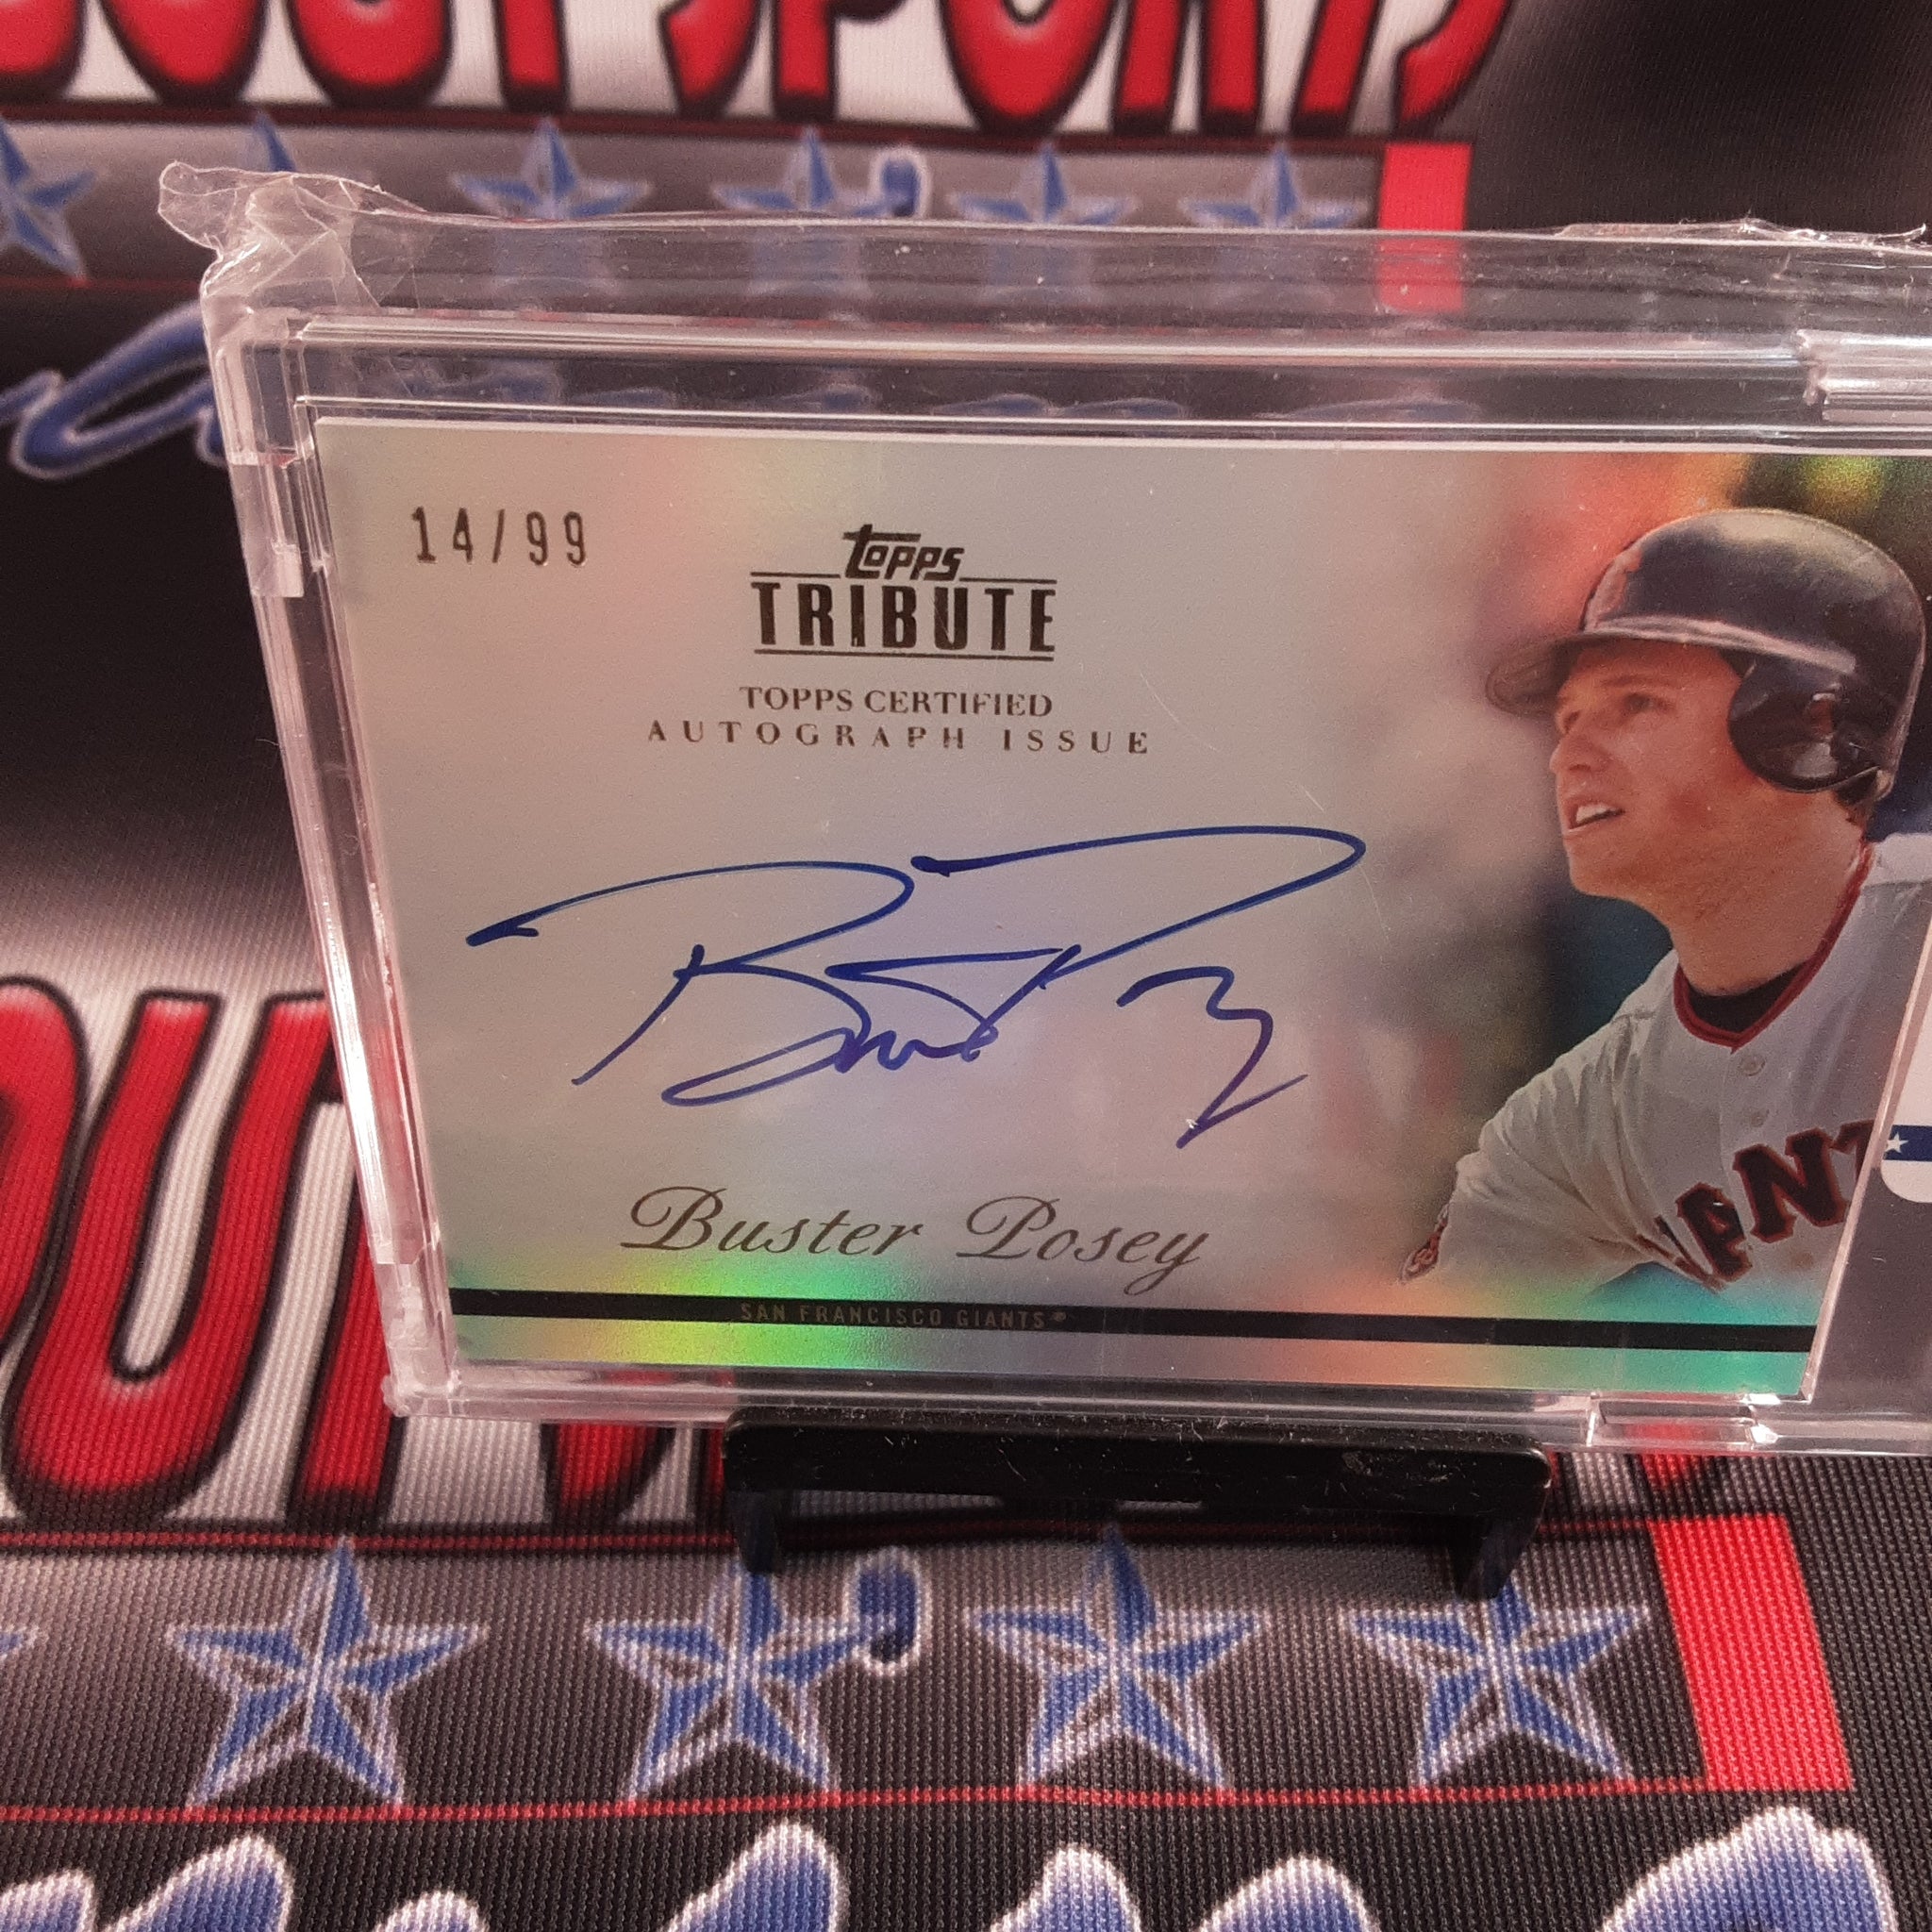 2012 Topps Tribute Silver Refractor #TA-BP Buster Posey Auto/99